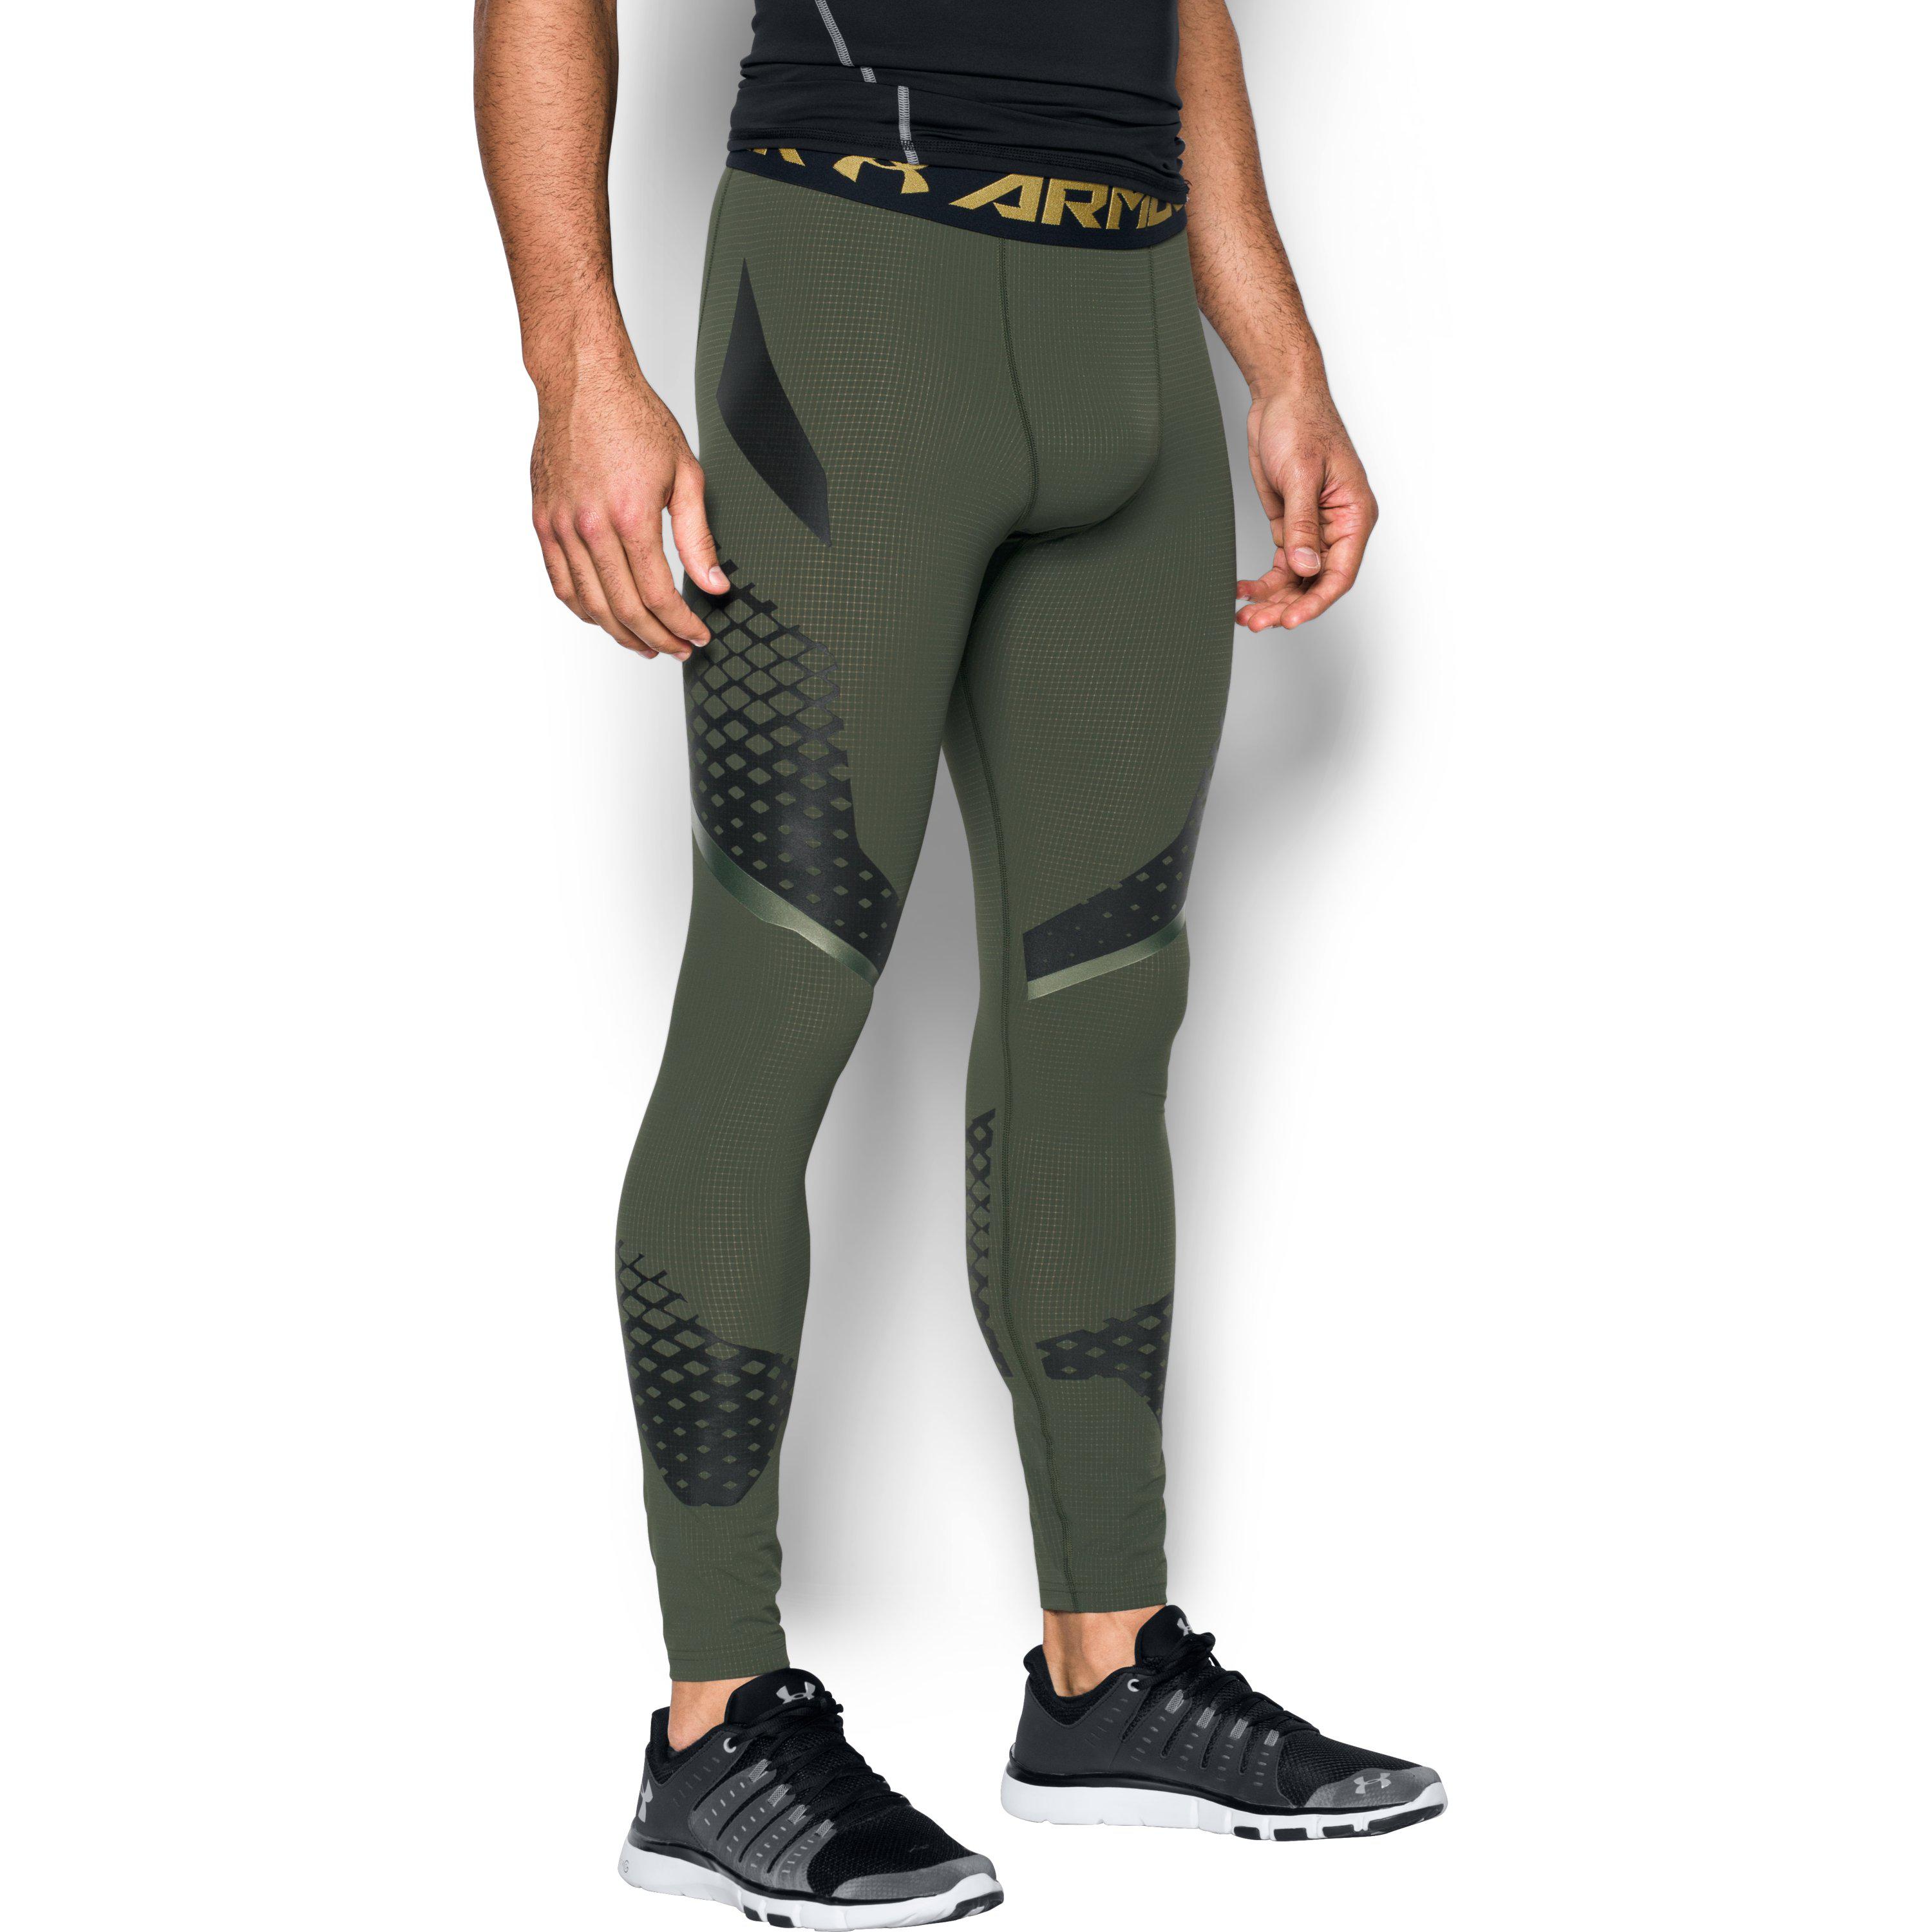 Buy Under Armour Men's Charged Compression Leggings, Graphite